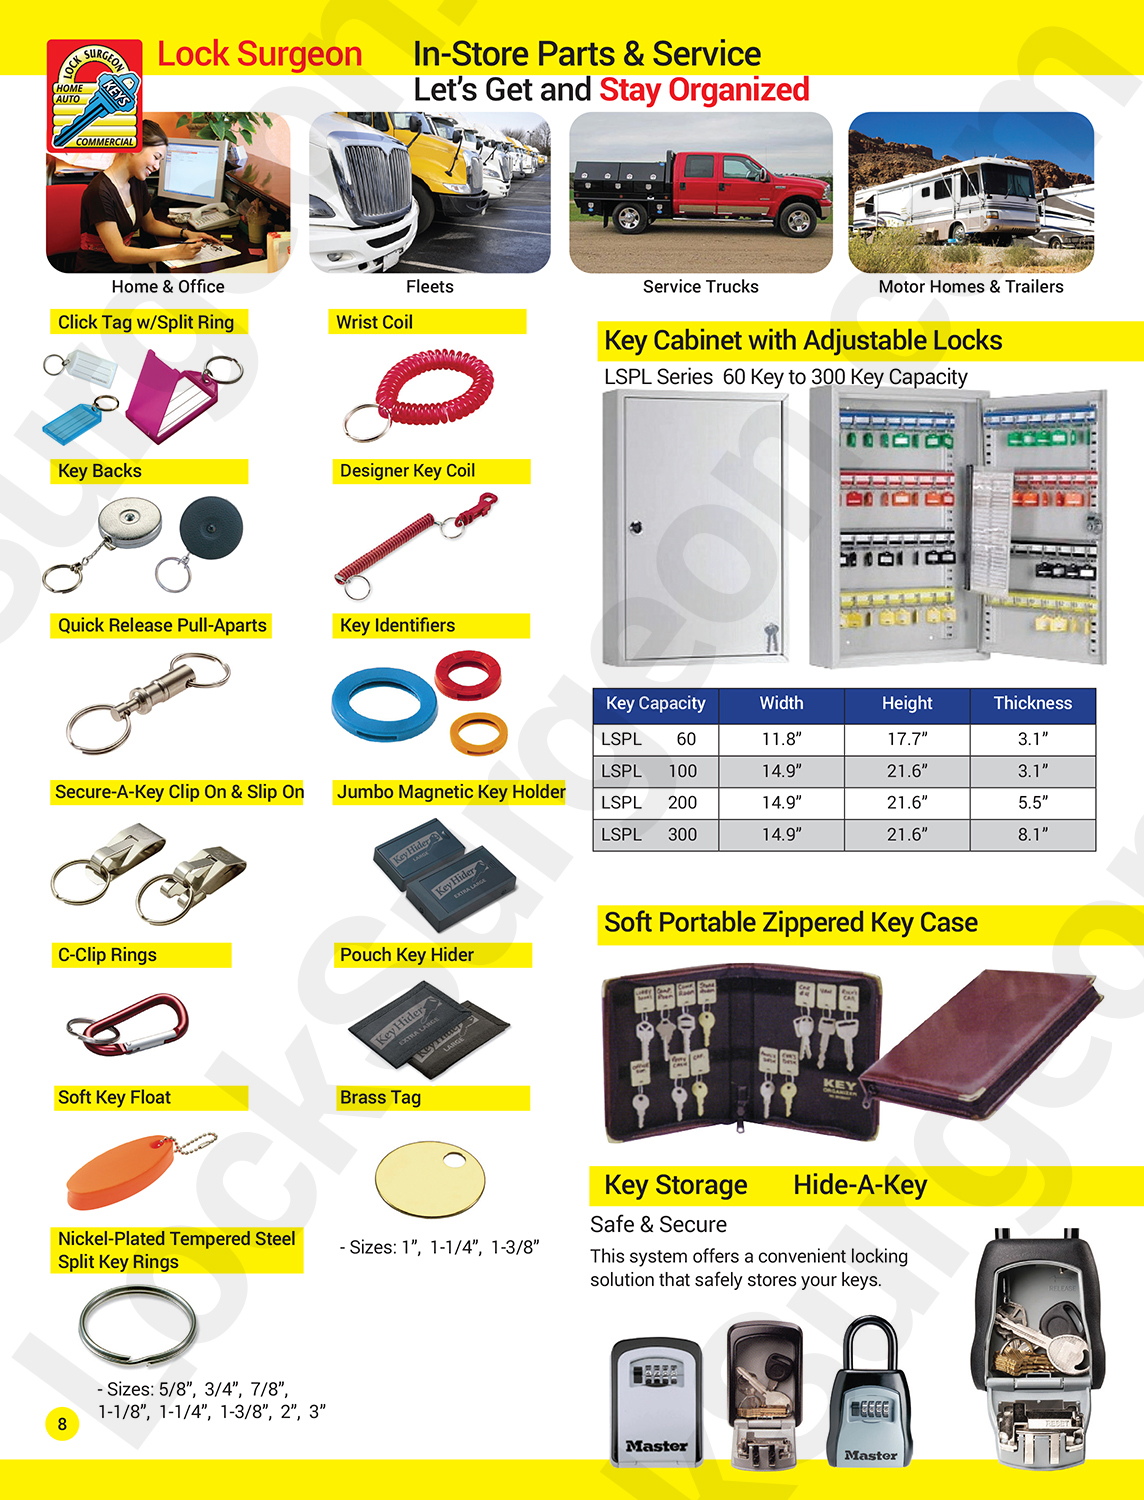 Acheson Lock Surgeon carry a variety of key organizing products.